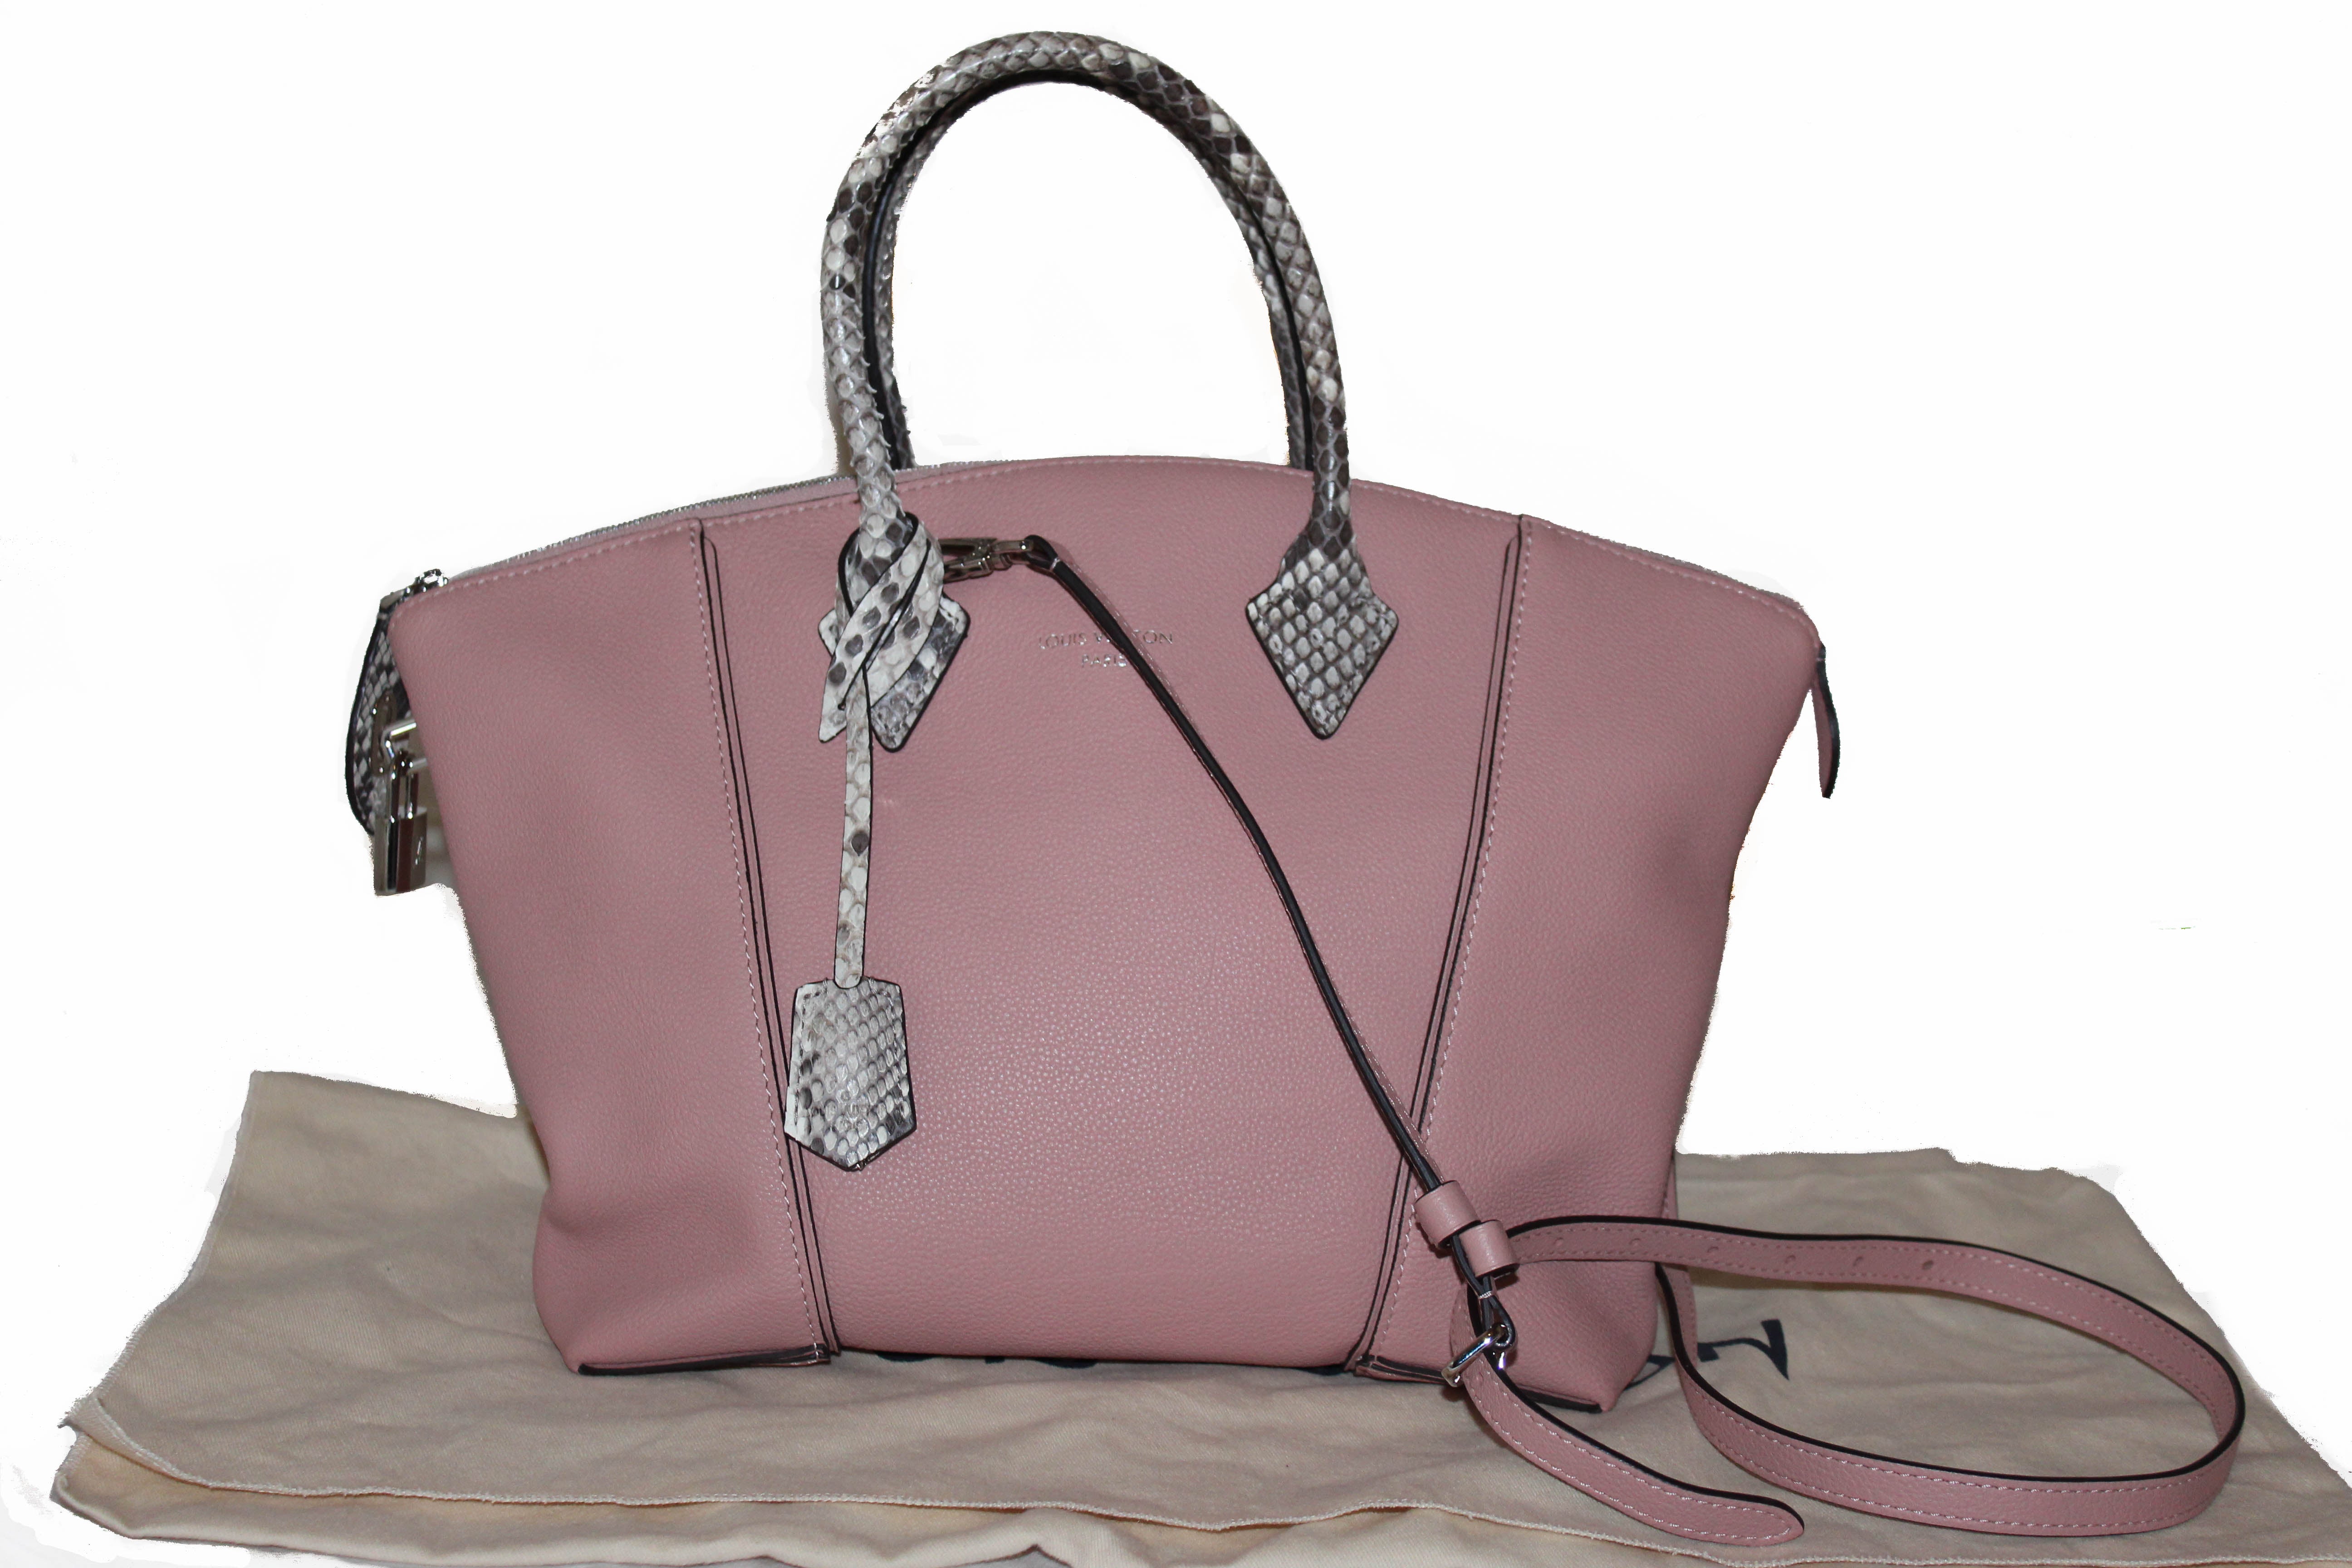 Louis Vuitton - Authenticated Soft Lockit Handbag - Leather Pink Plain for Women, Very Good Condition